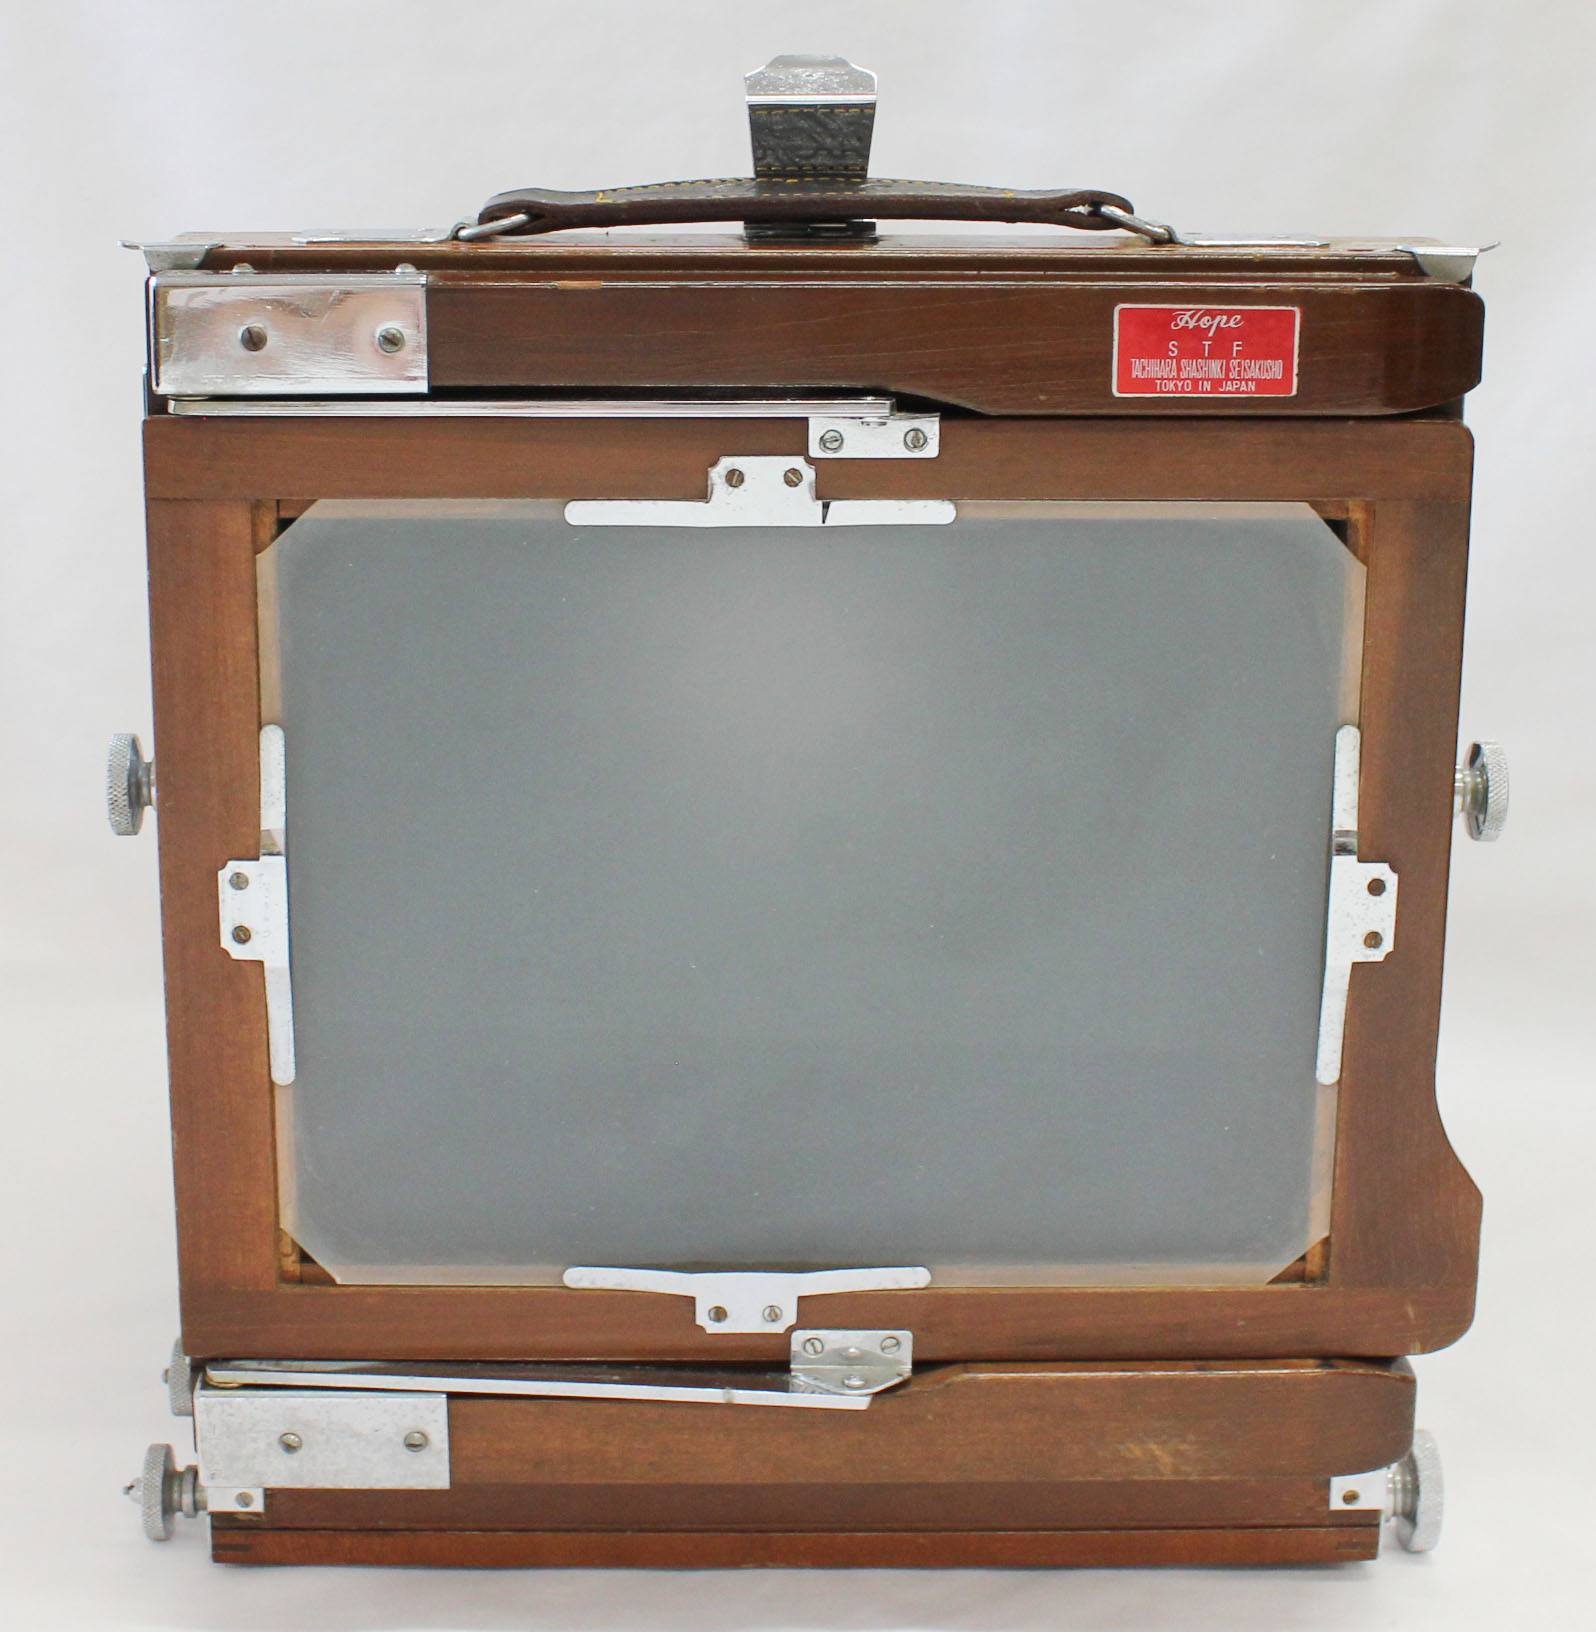  Tachihara Hope A STF 6 1/2x8 1/2 6.5x8.5inch 165x216mm Wood Field Camera with 8 Cut Film Holder from Japan Photo 6